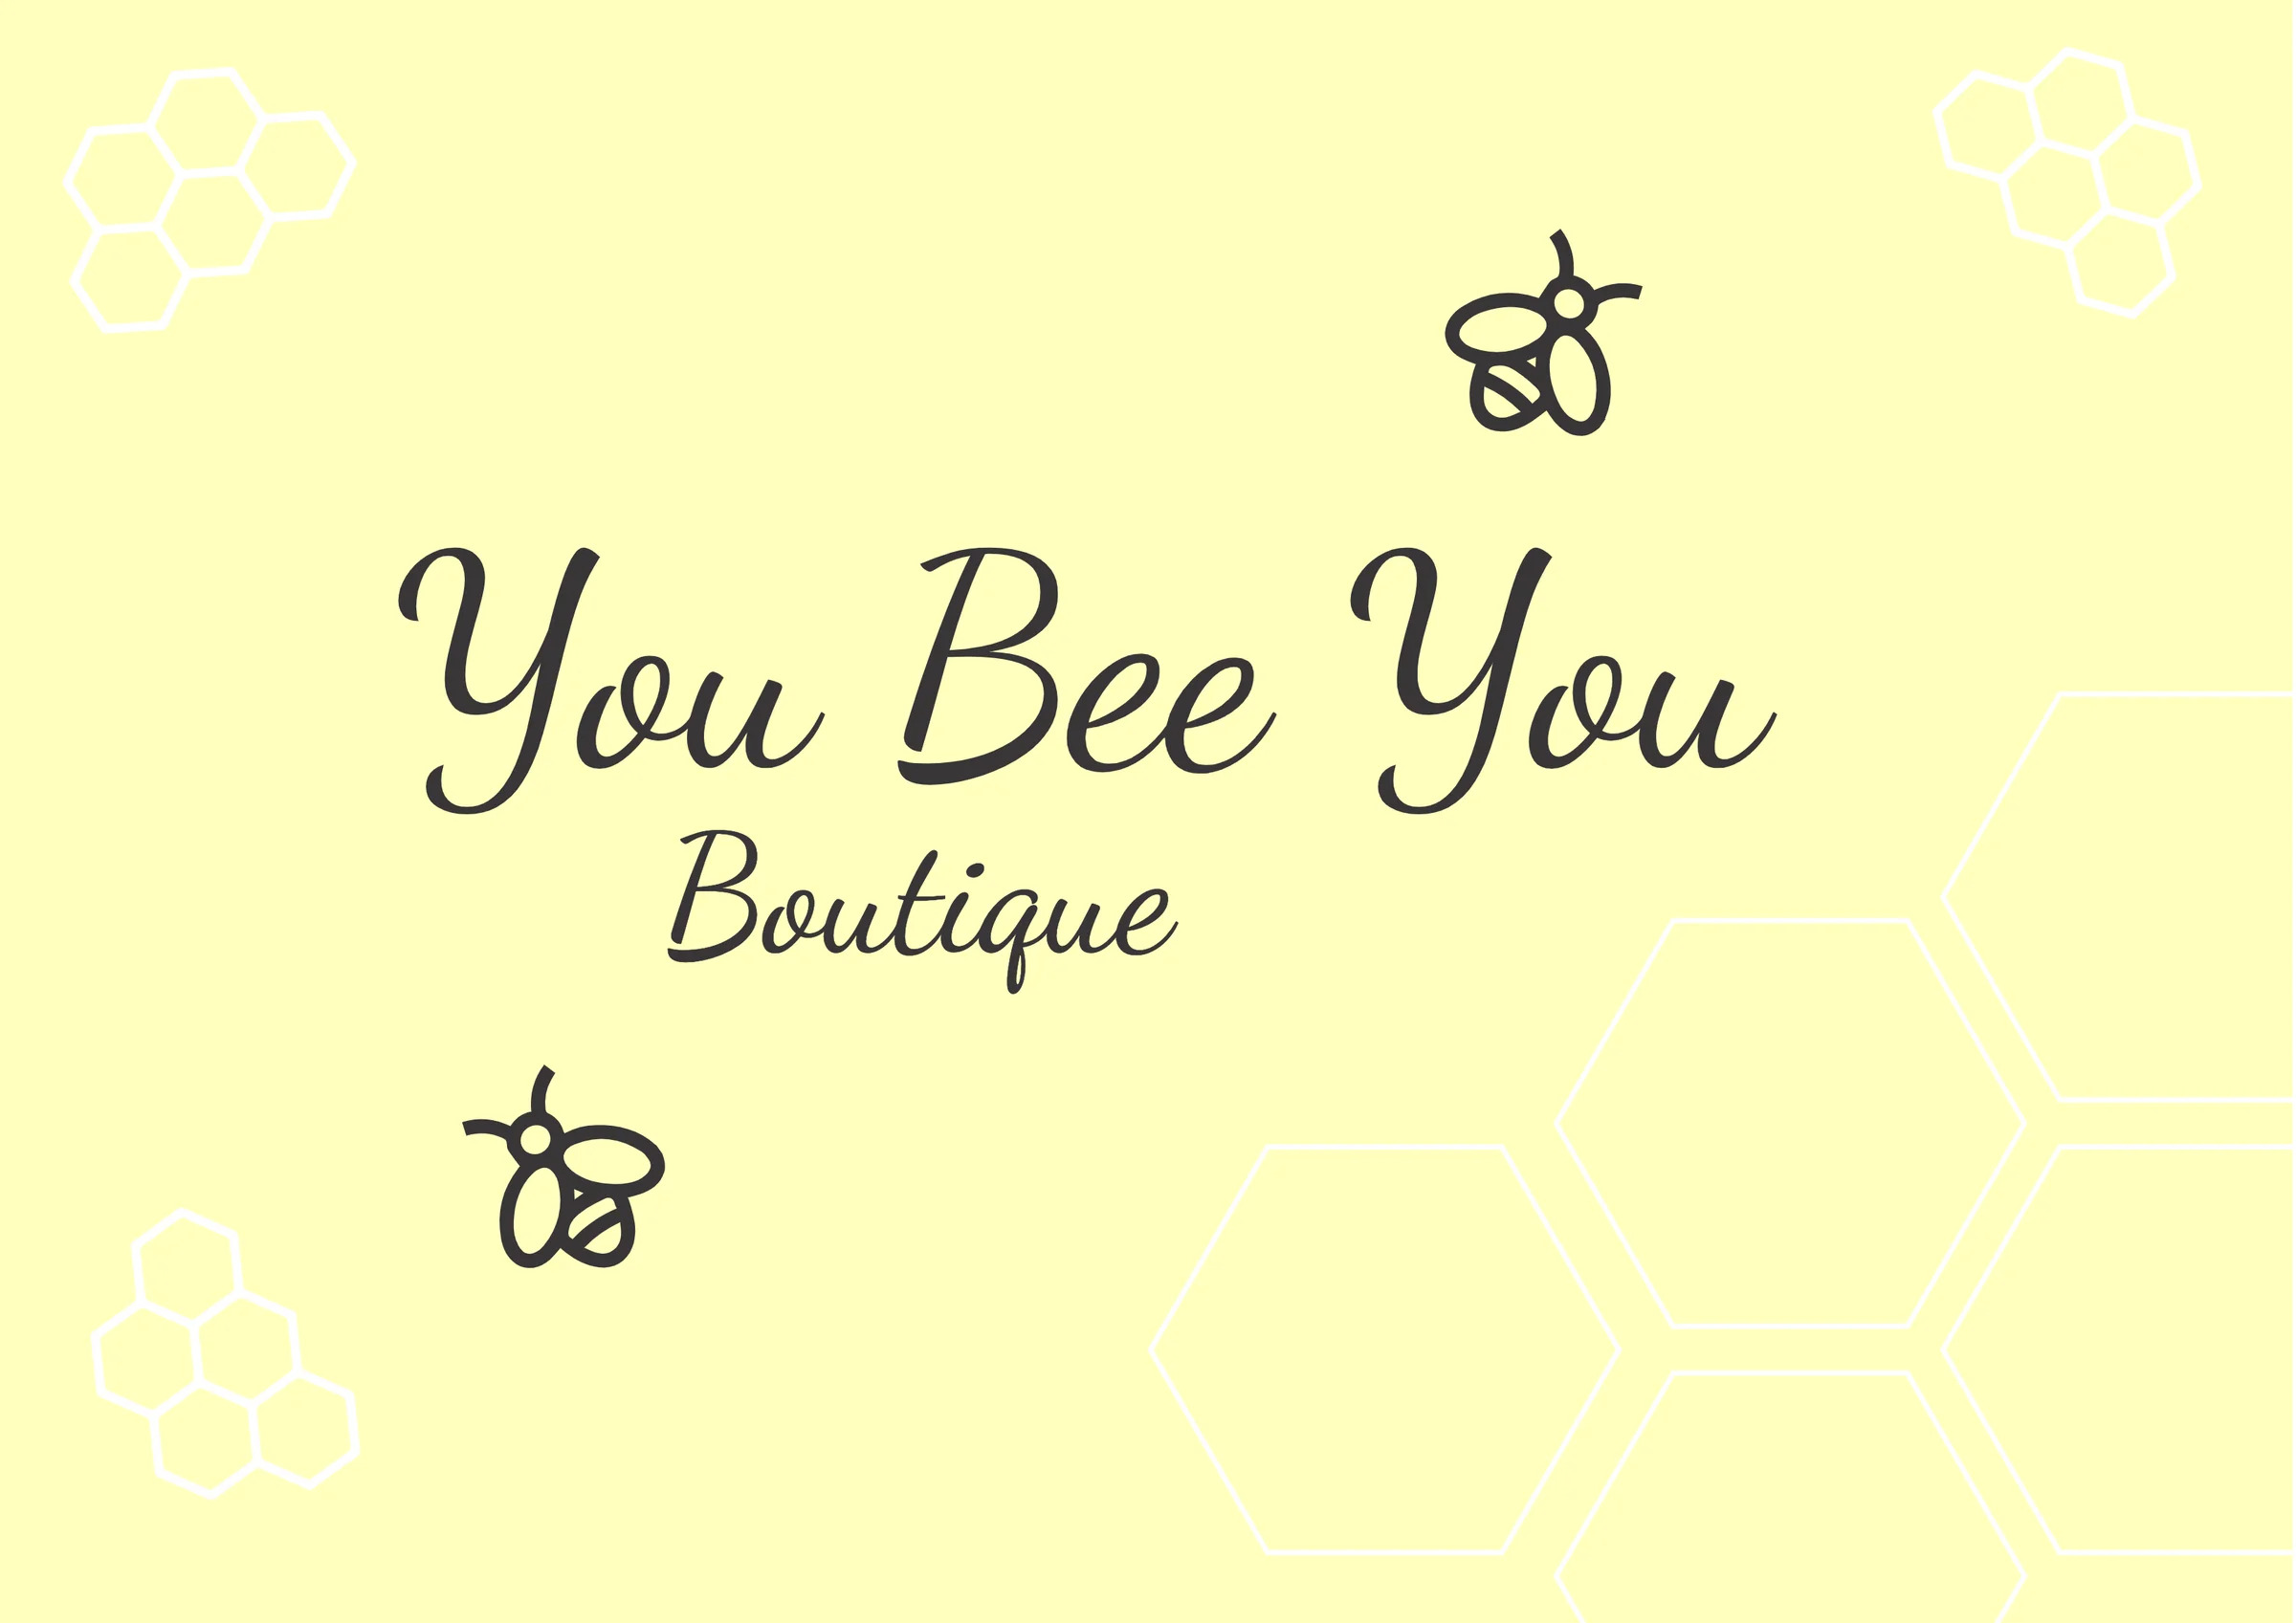 You Bee You Boutique